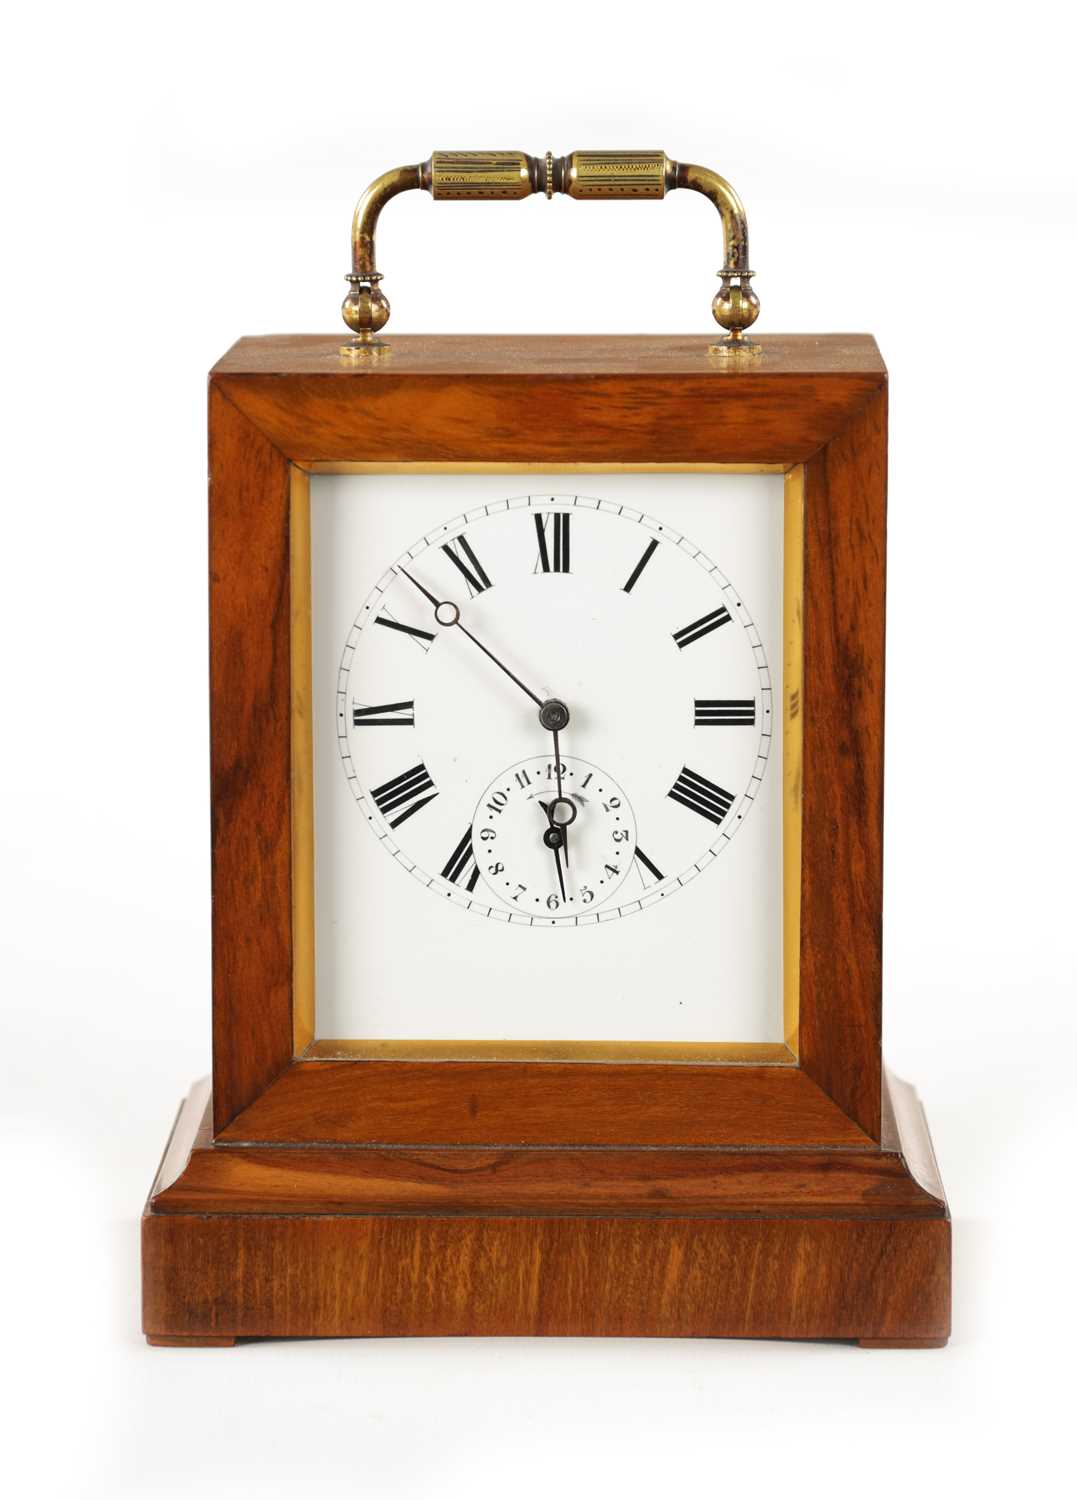 Lot 1296 - A LATE 19TH FRENCH CARRIAGE-STYLE MANTEL CLOCK WITH ALARM